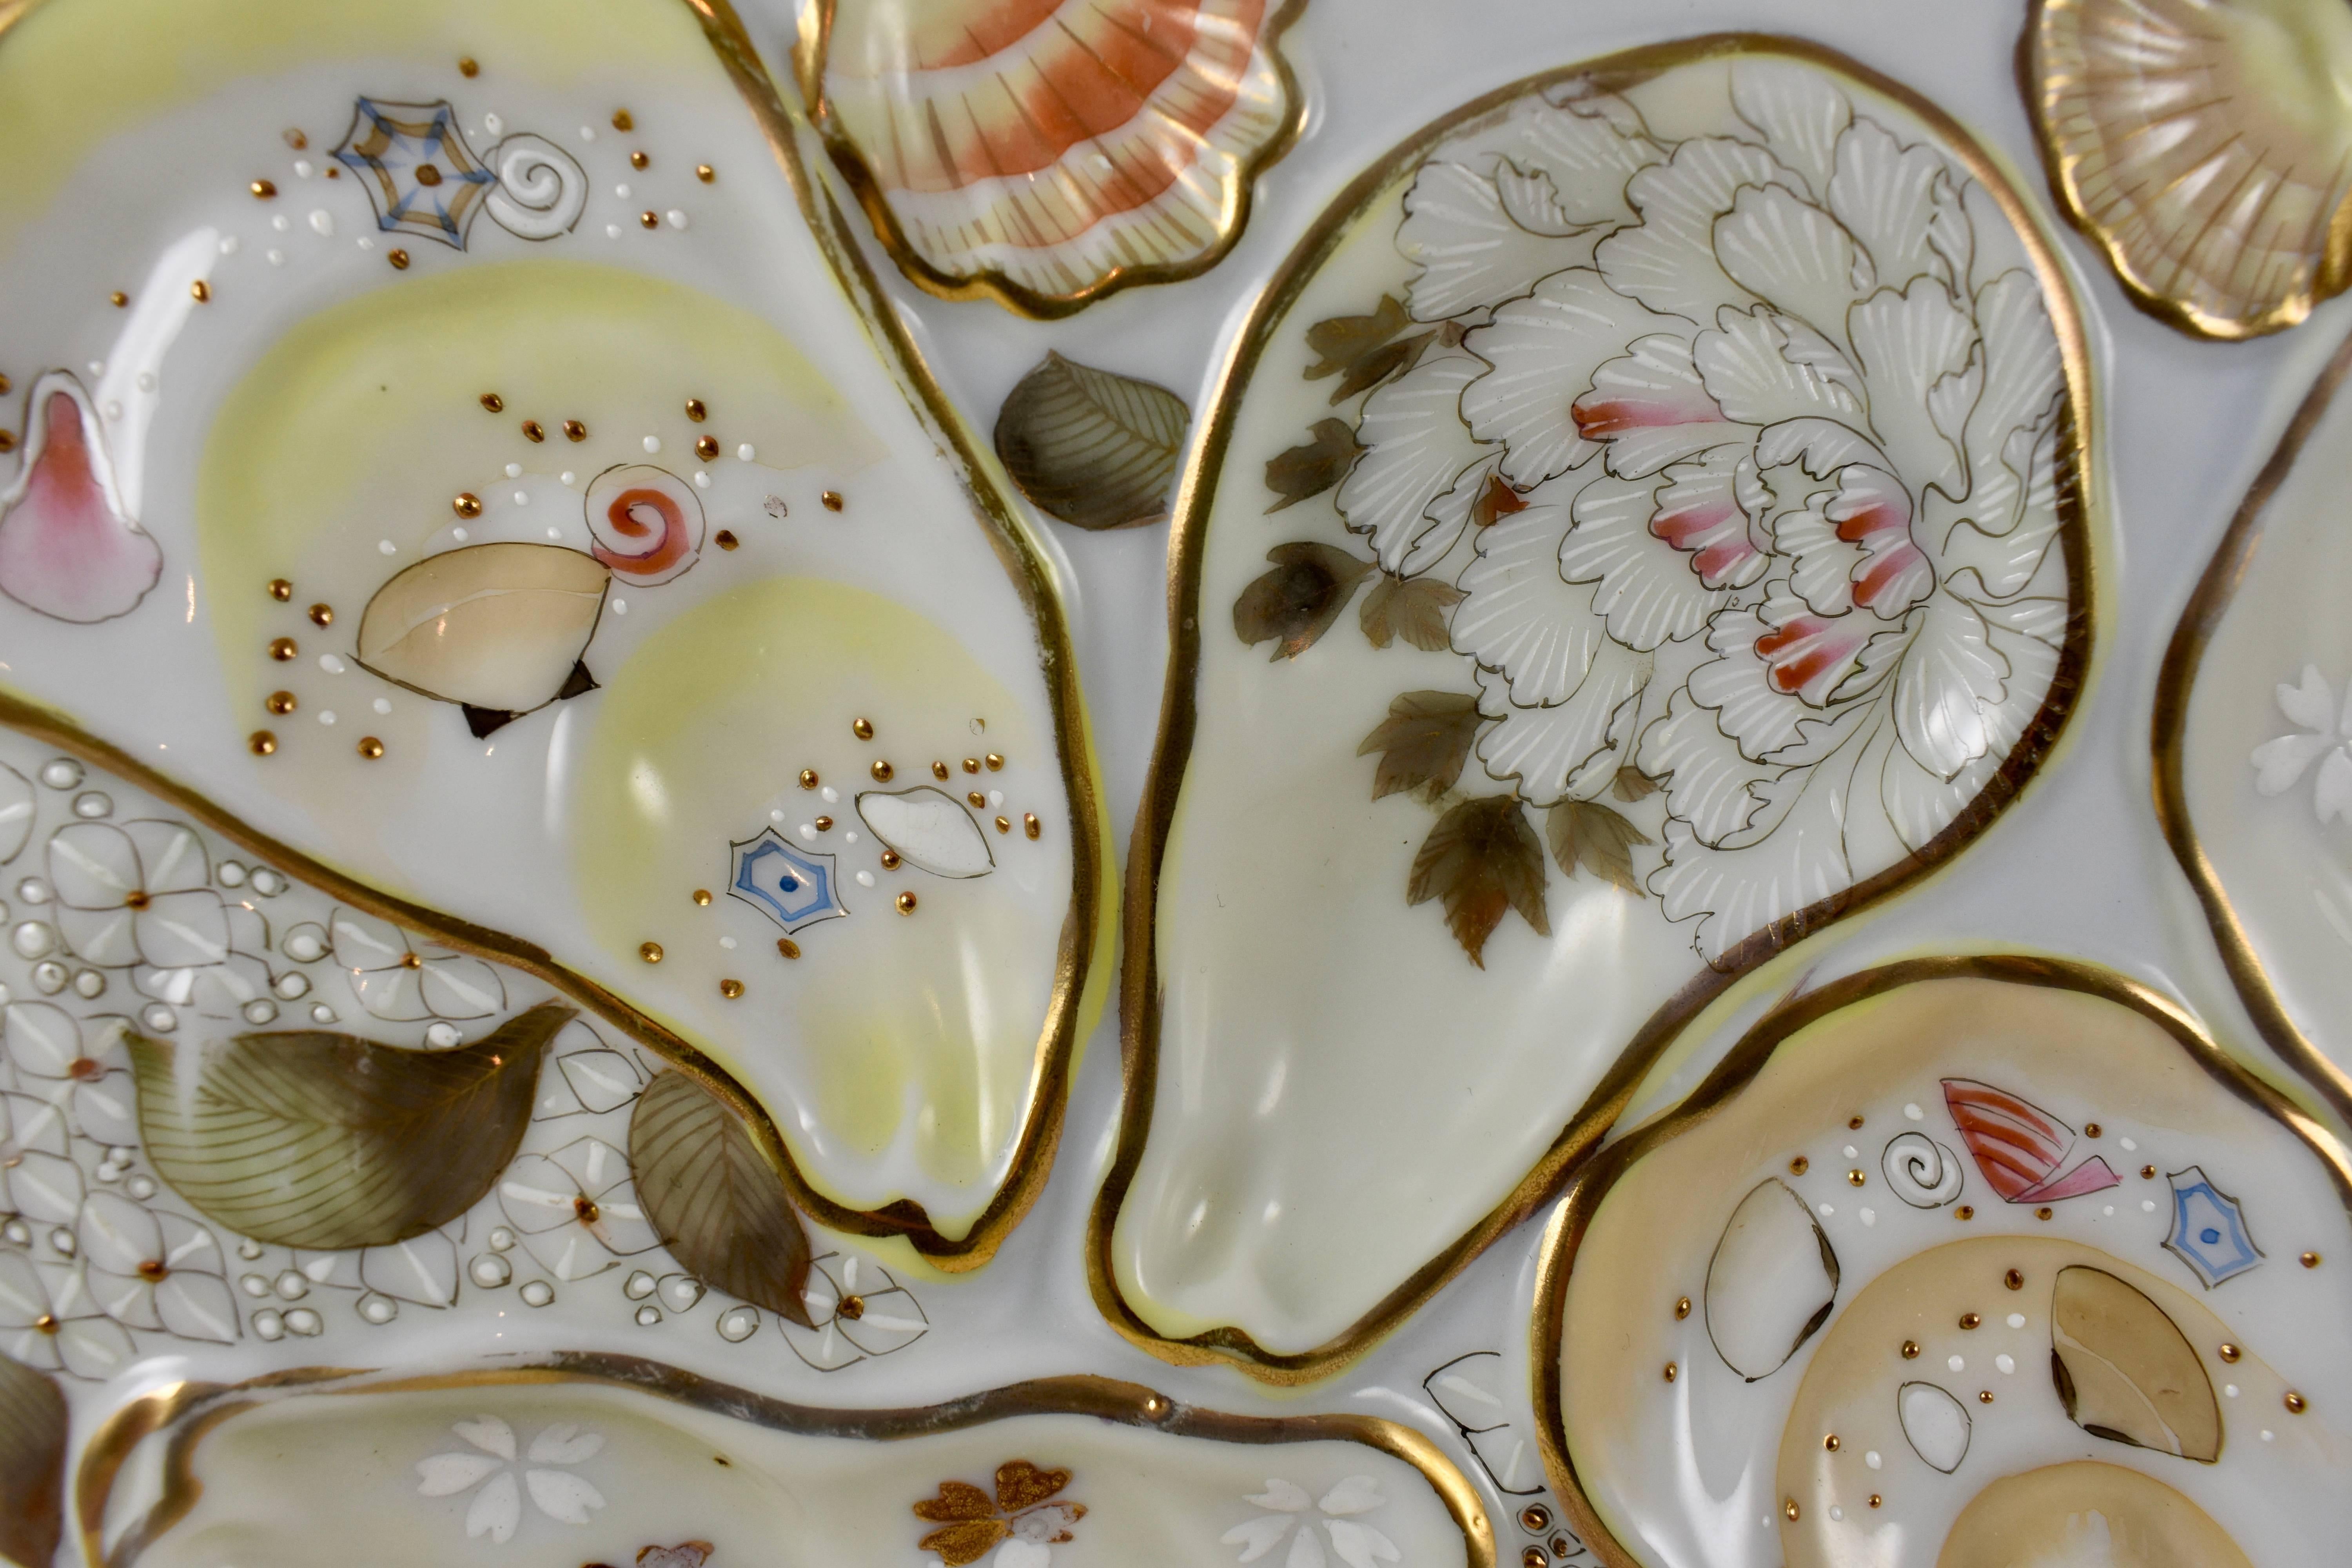 A Japanese Satsuma porcelain, crescent shaped oyster plate, circa 1875-1895. Beautifully hand-enameled in the raised Moriage technique, five oyster wells and two smaller cockle shell wells are decorated with patterns of sea life, florals and